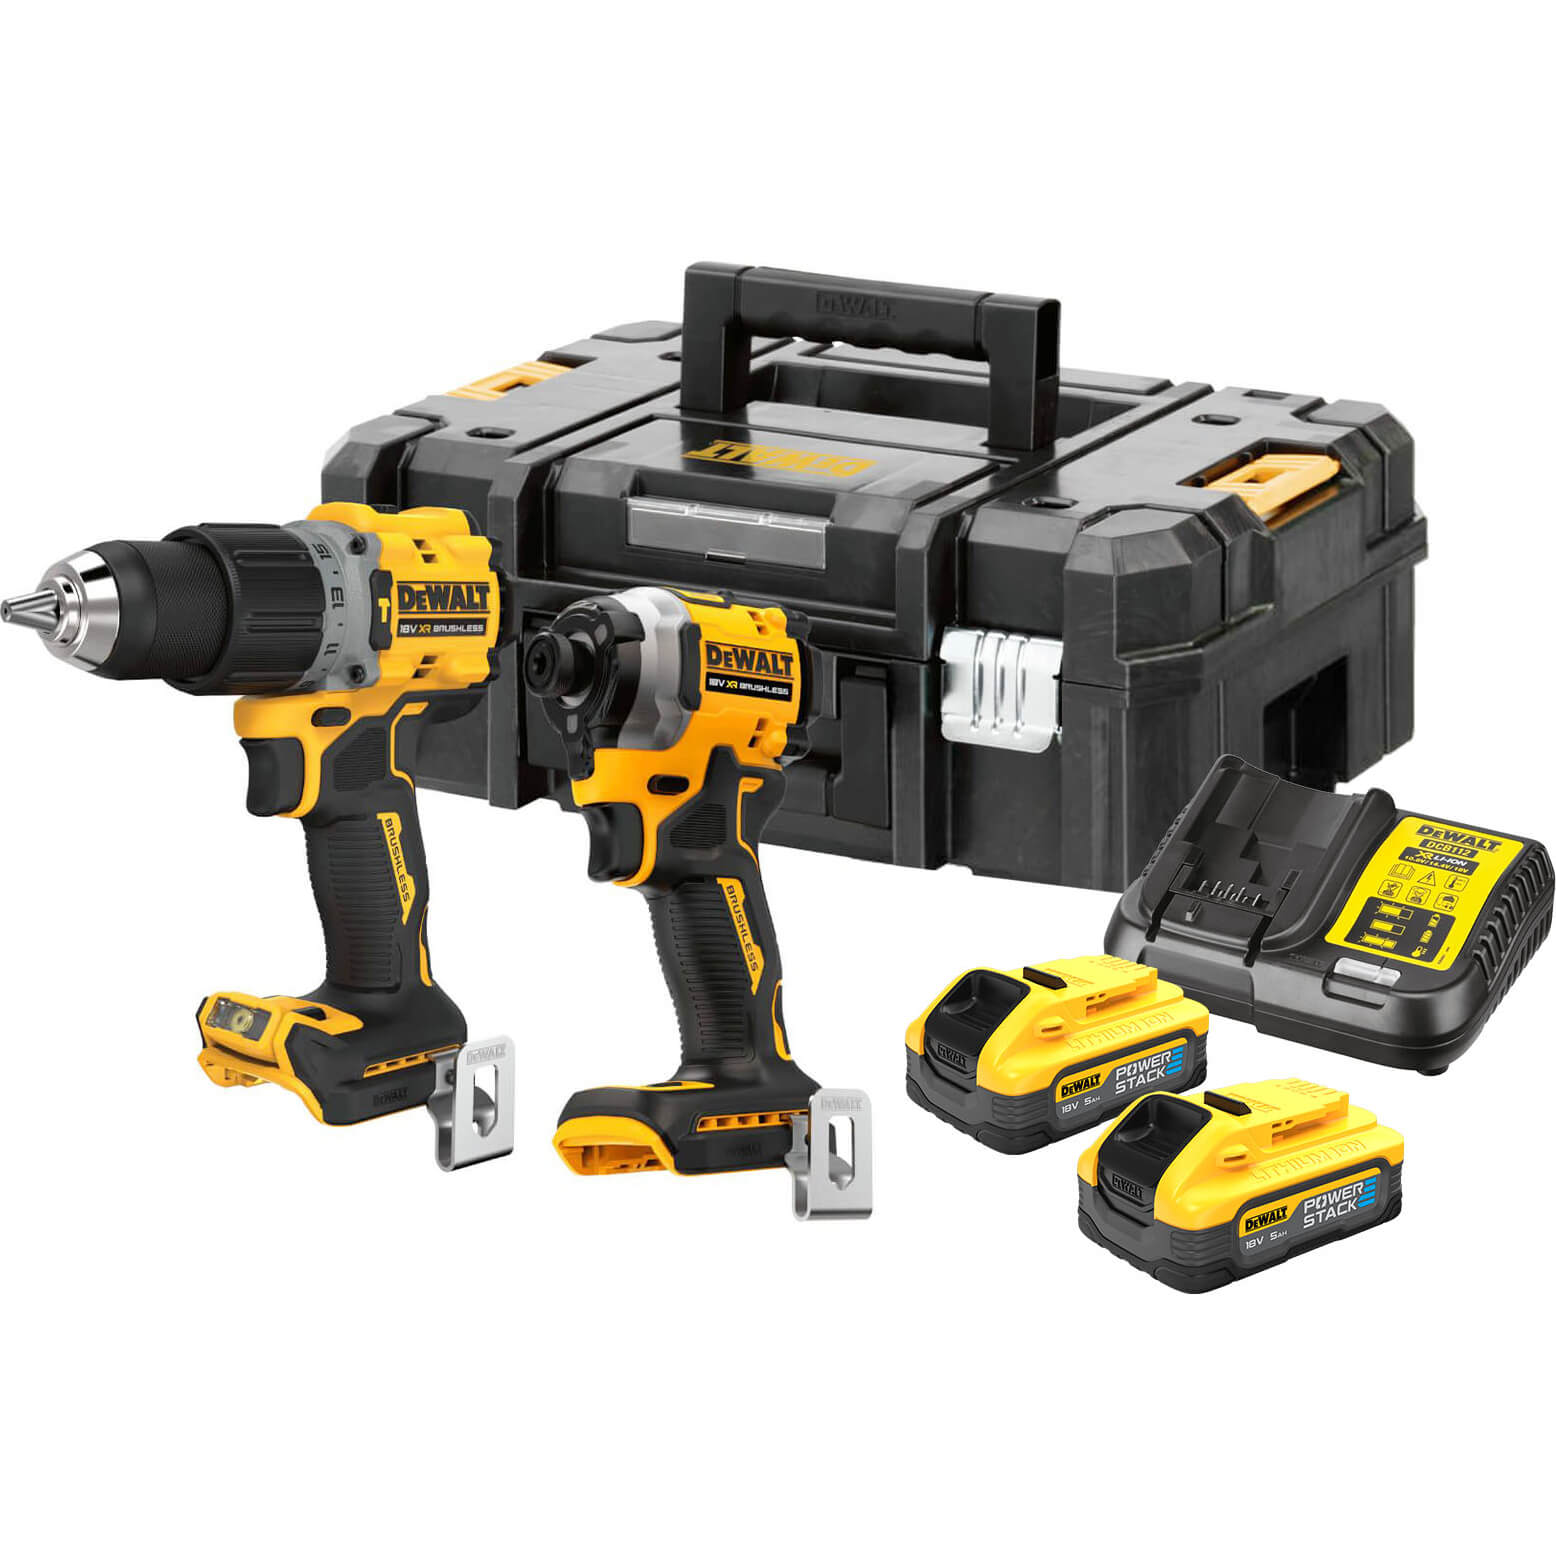 DeWalt DCK2050 18v XR Brushless Combi Drill and Impact Driver 2 x 5ah Li-ion Powerstack Charger Case